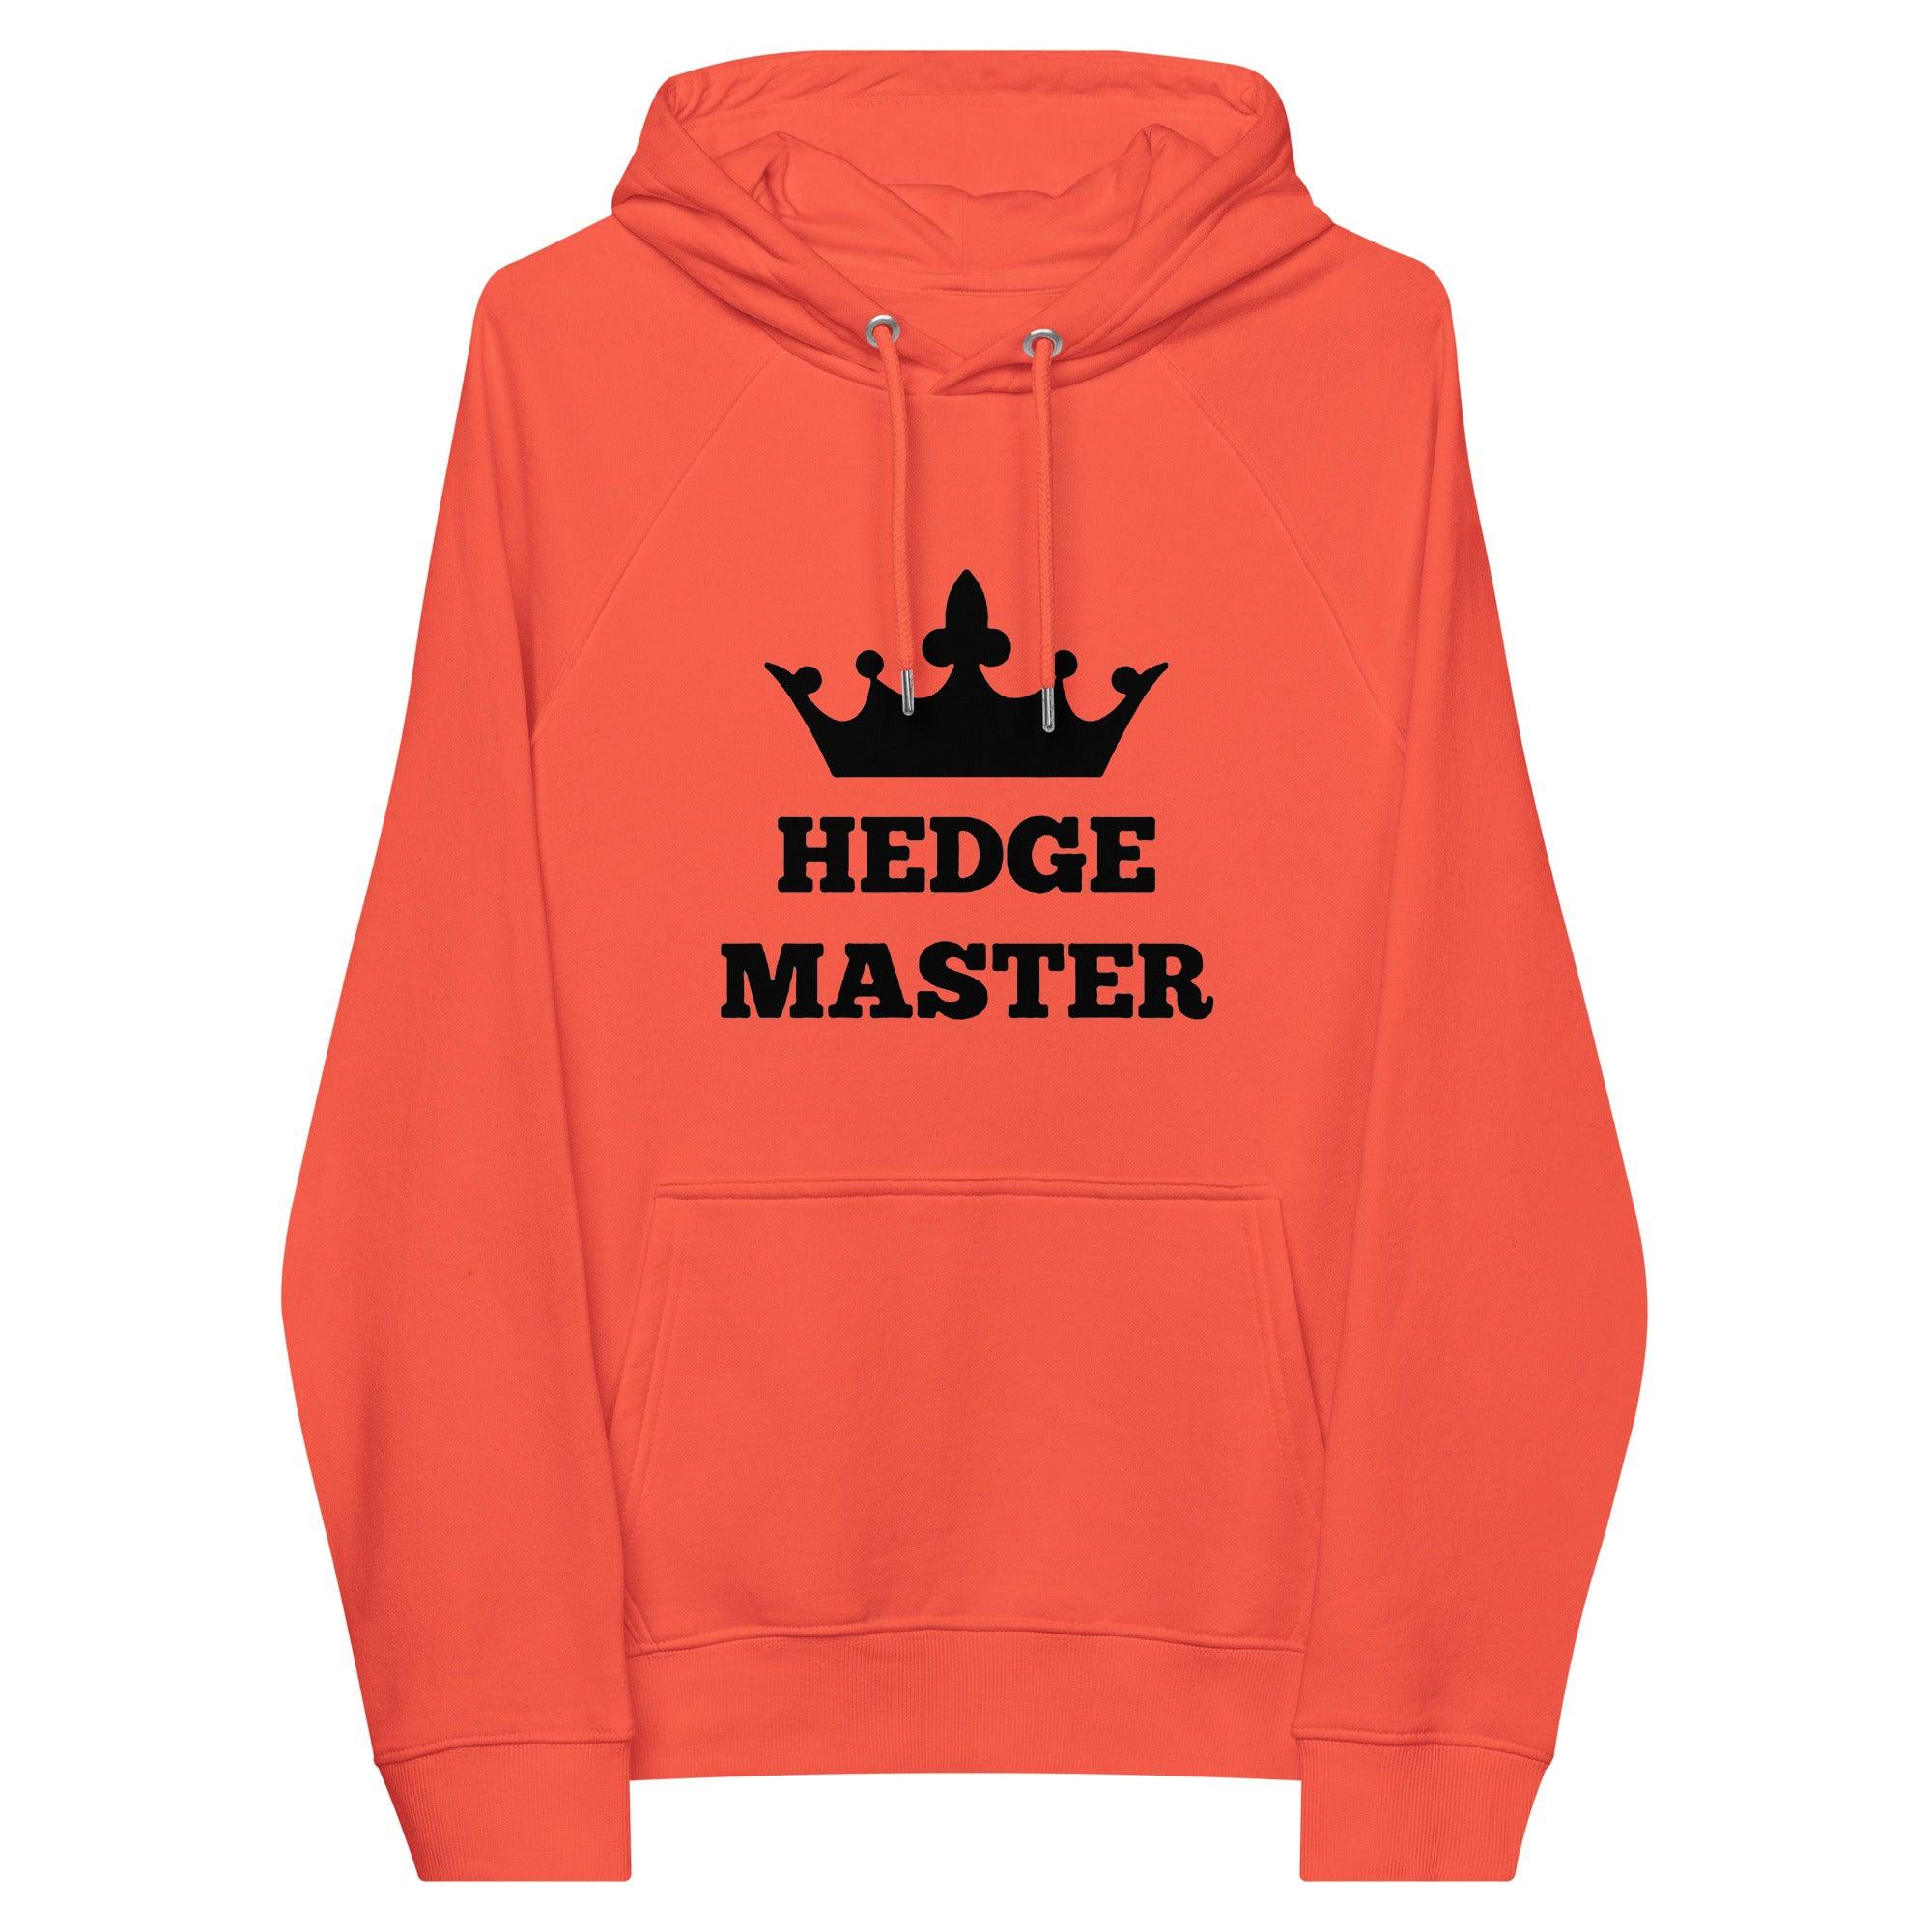 Hedge Master Pullover Hoodie - InvestmenTees